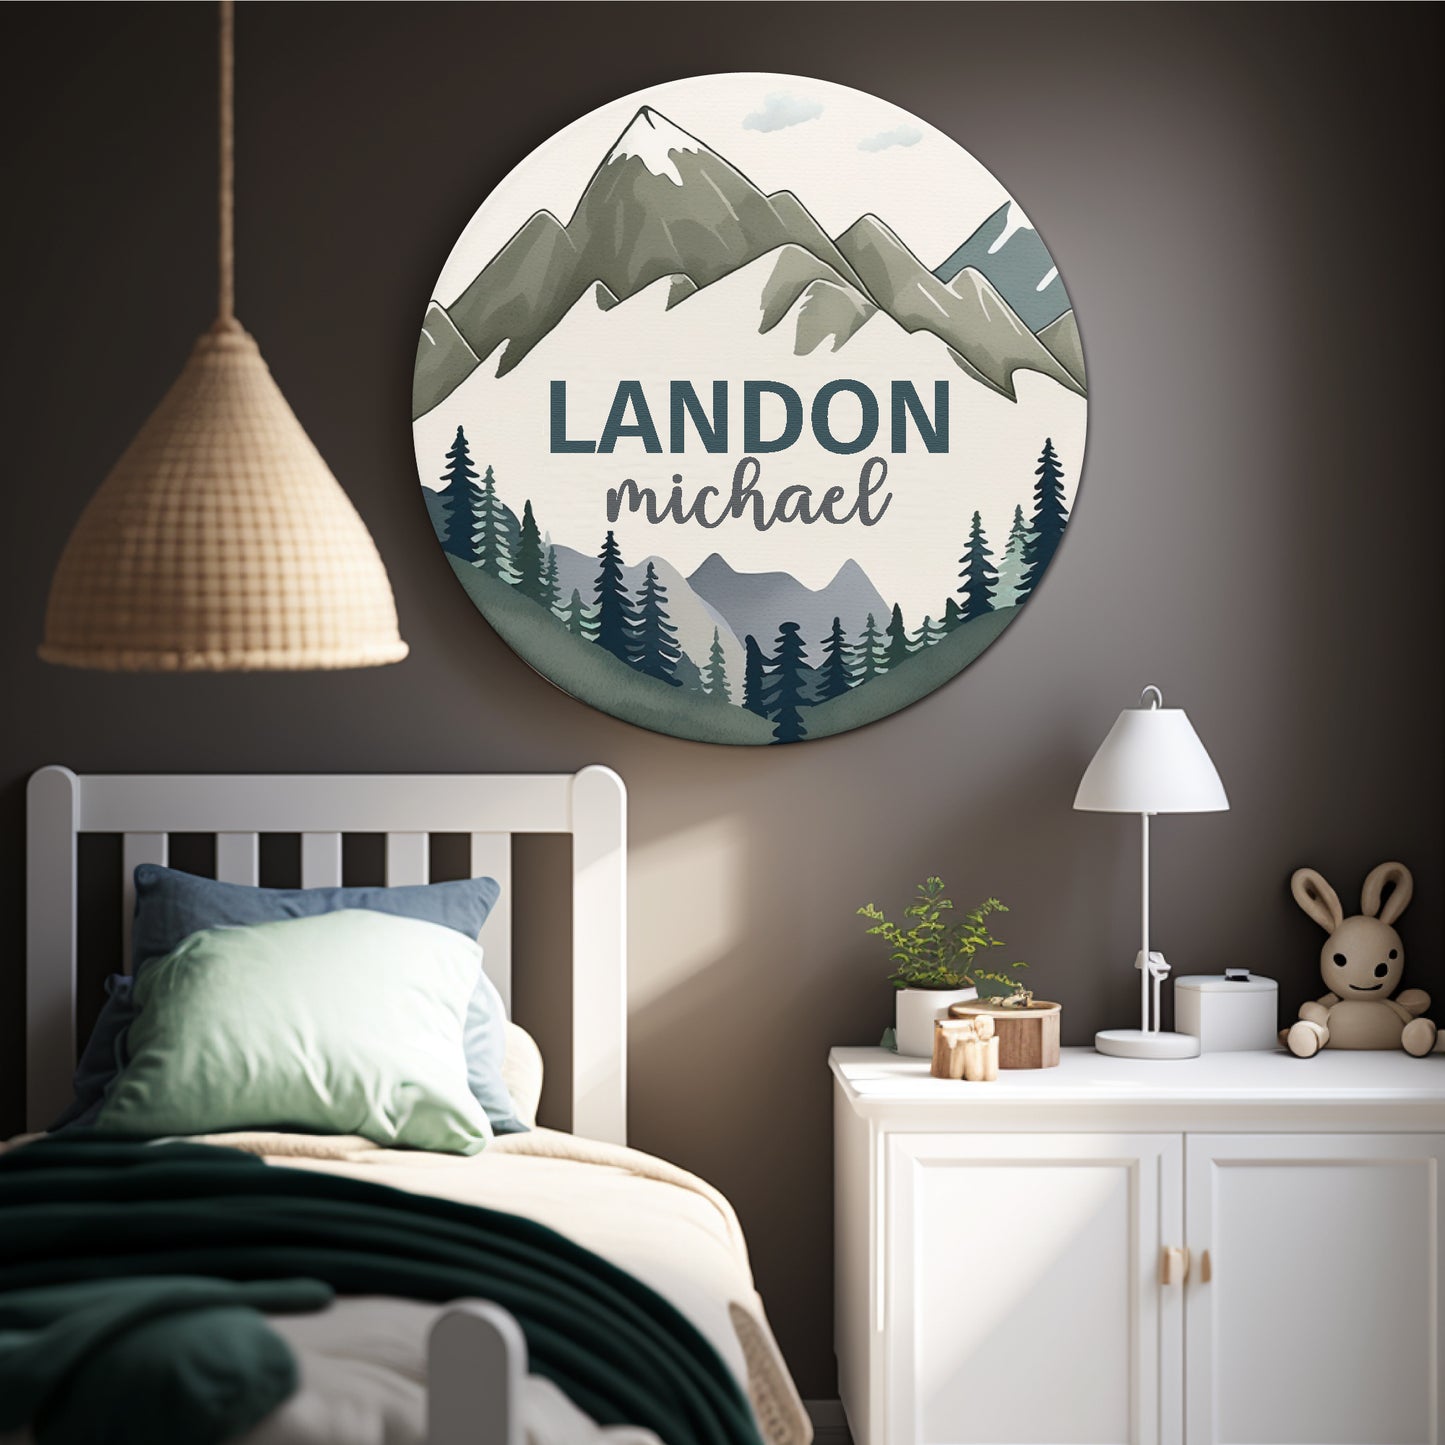 Woodland Nursery Name Sign - Mountain Nursery Decor - Personalized Name Sign for Kids and Babys